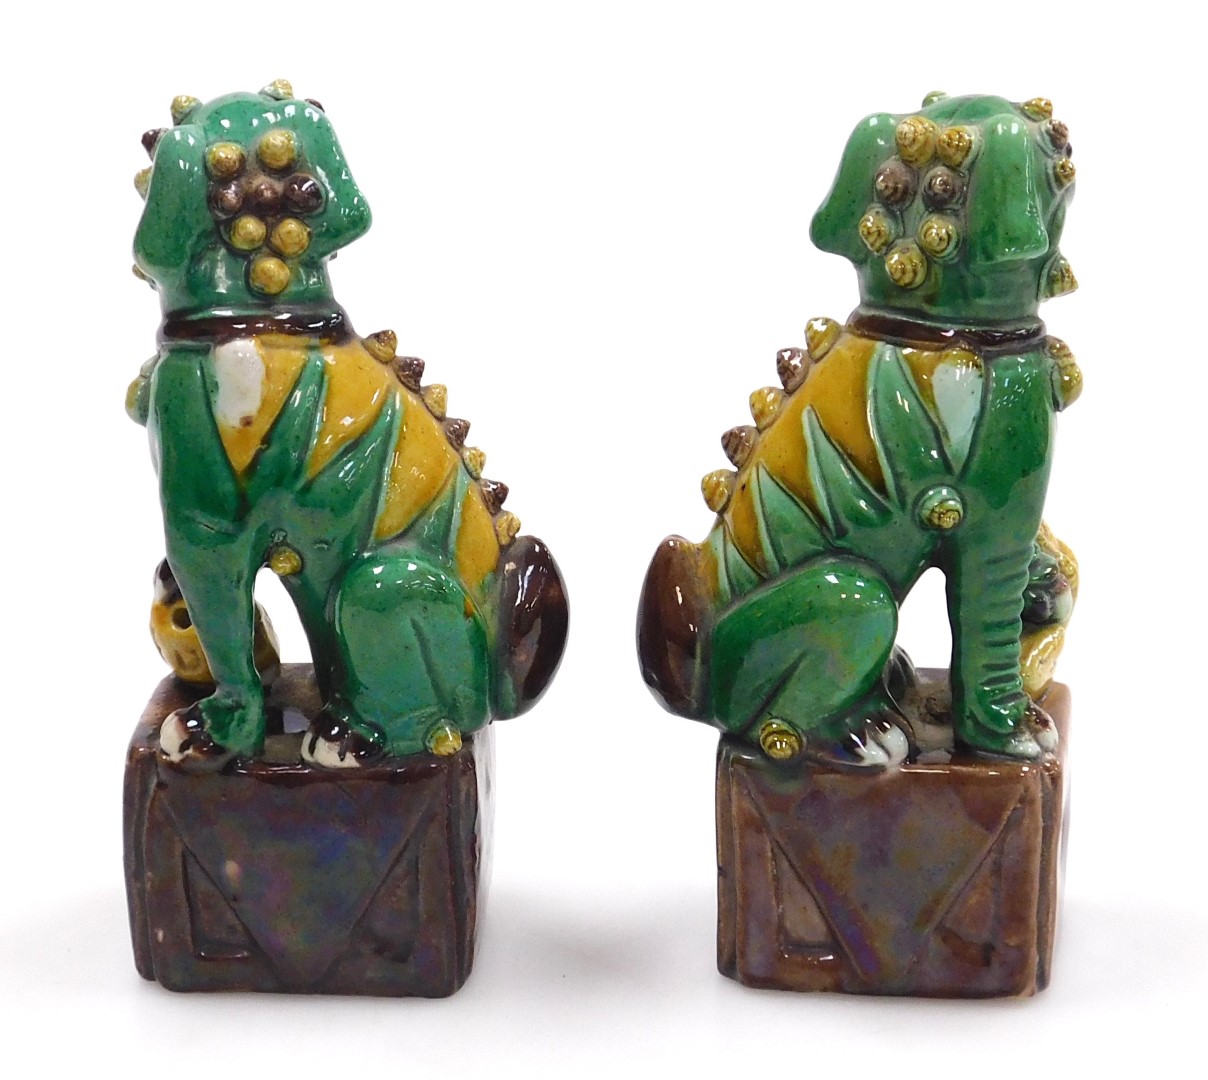 A pair of 19thC Qing dynasty porcelain Sancai style Foo dogs, with a green and yellow glaze, modelle - Image 3 of 5